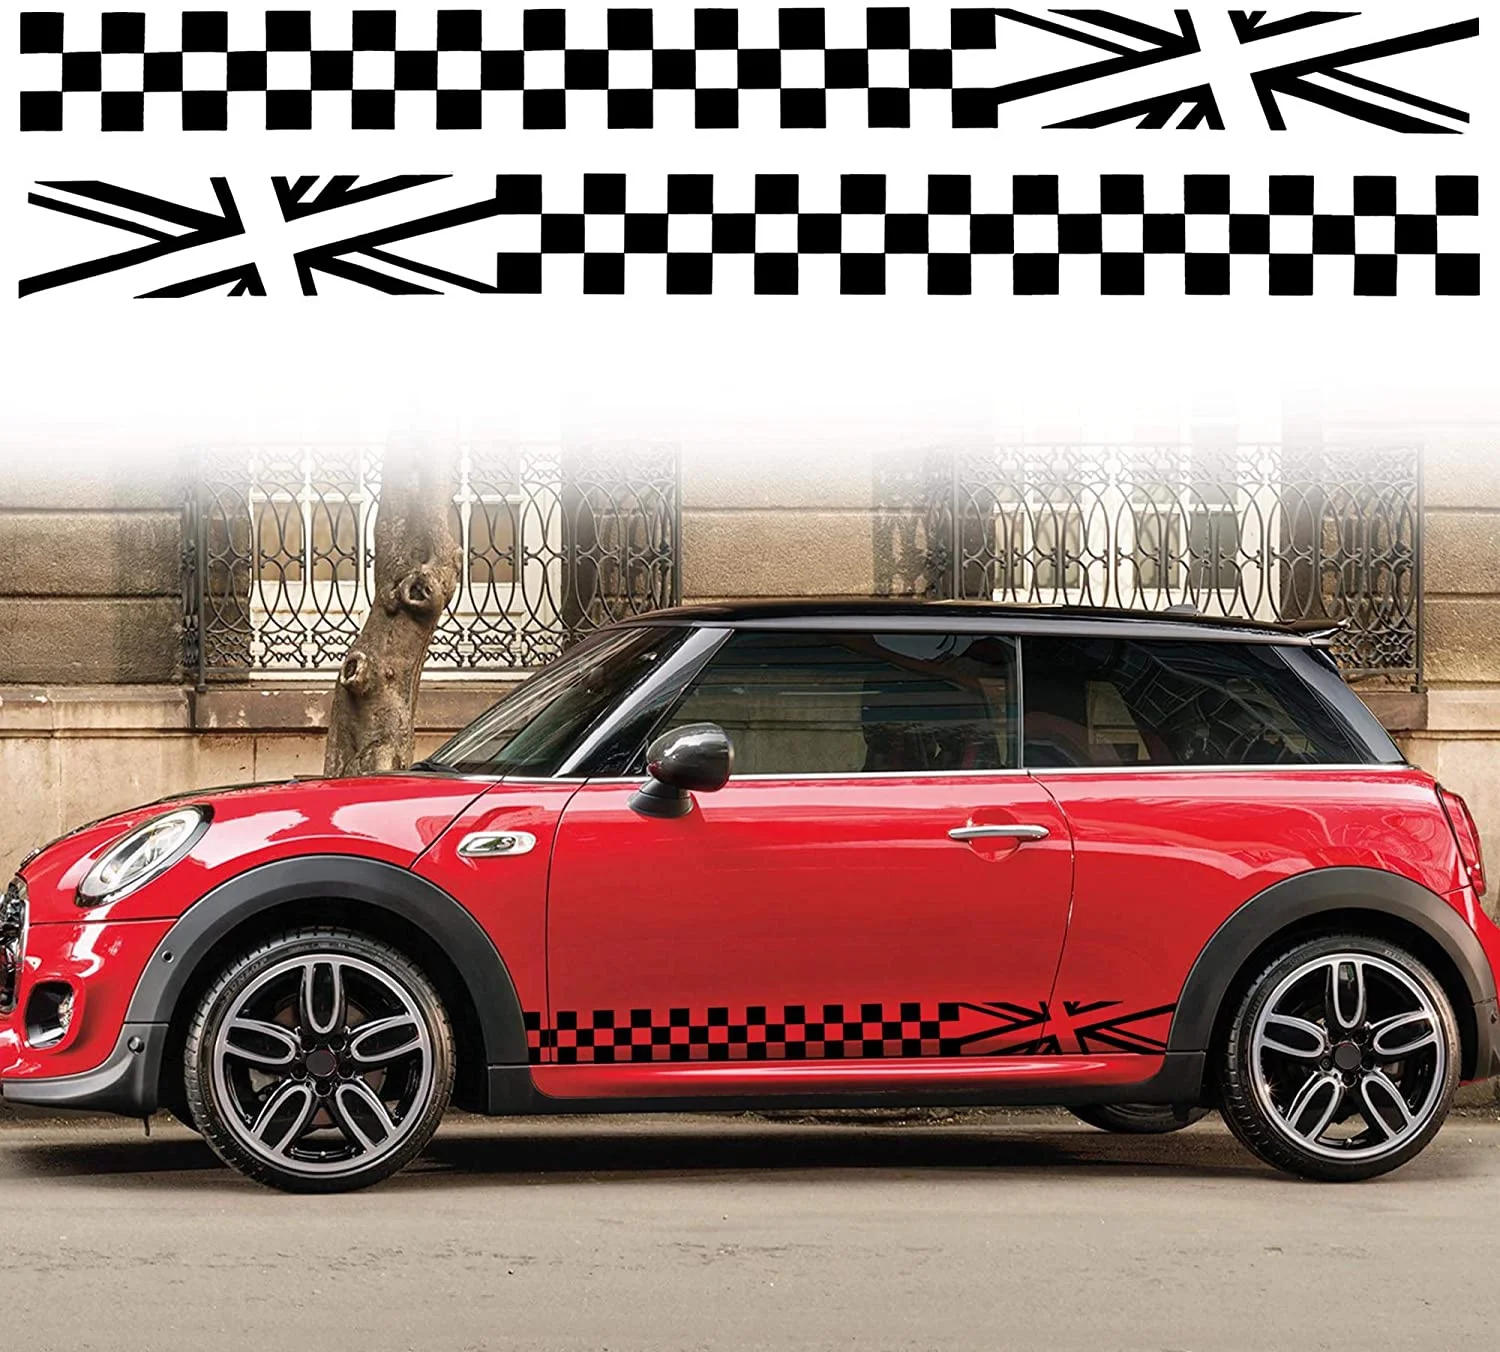 

For x2 TOMALL 1 Pair 78.7" Car Universal Racing Checkered Flag Side Stripes Decal Compatible with Mini Cooper Vinyl